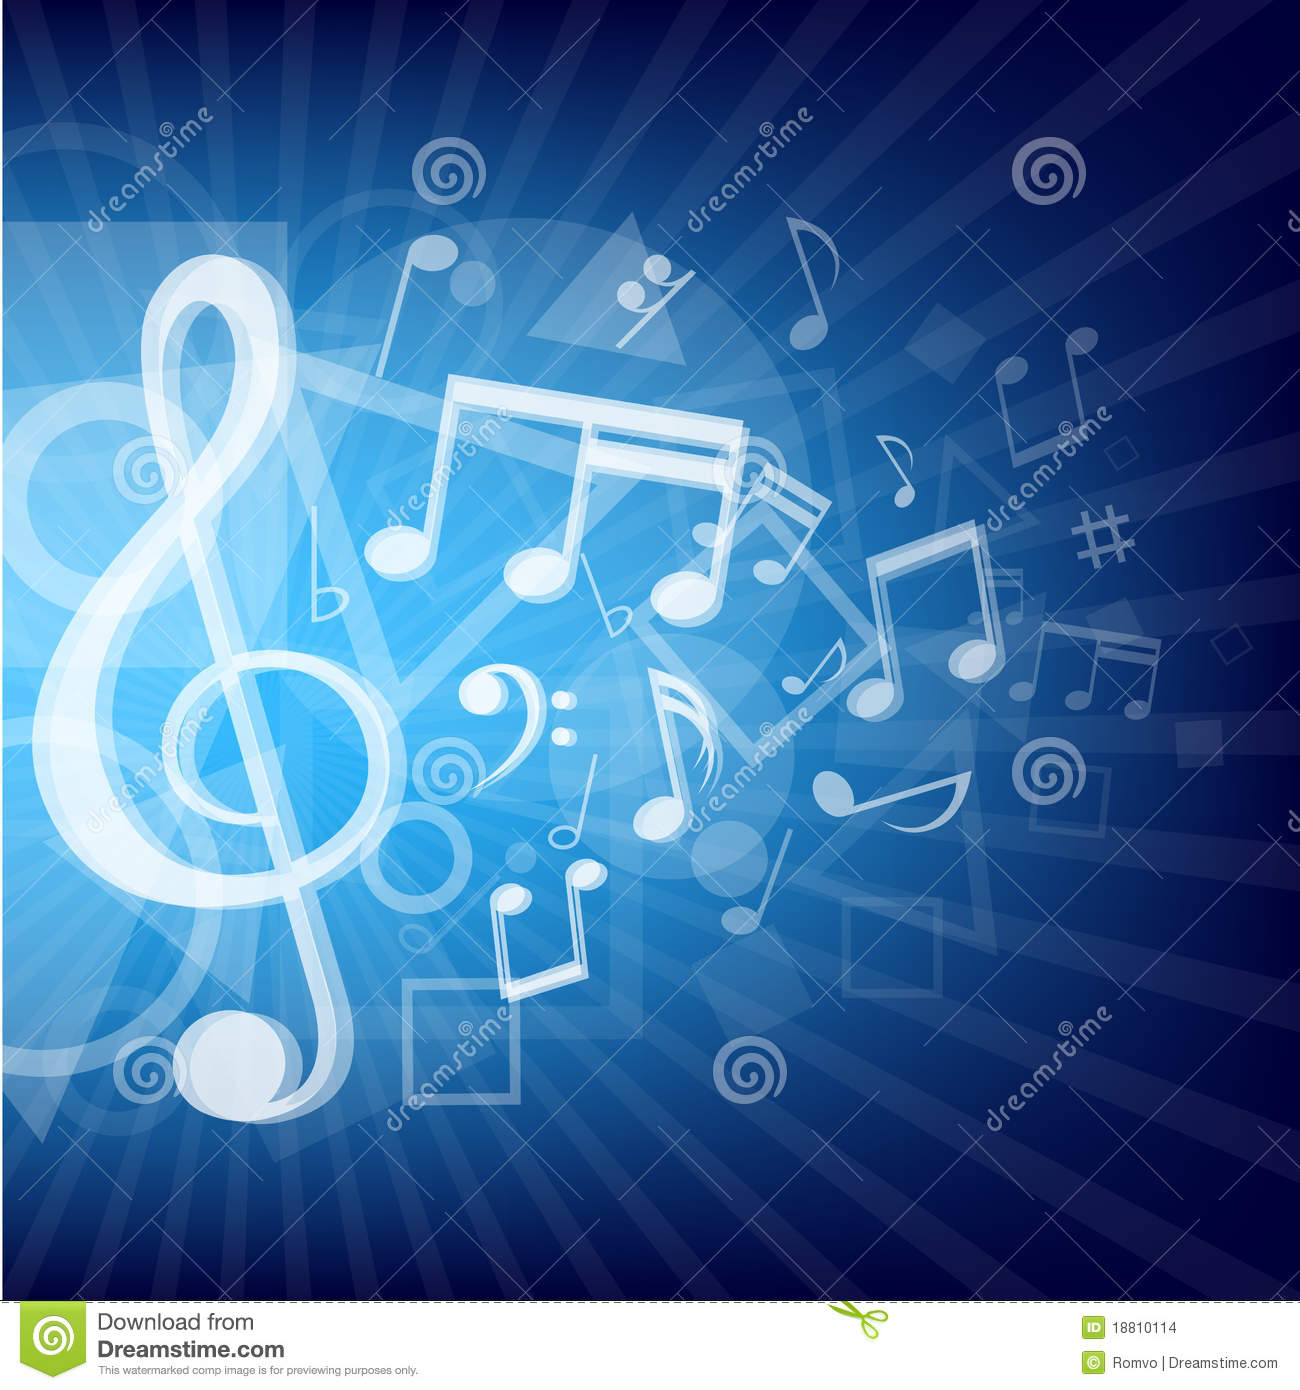 Blue Music Note Backgrounds Modern music n